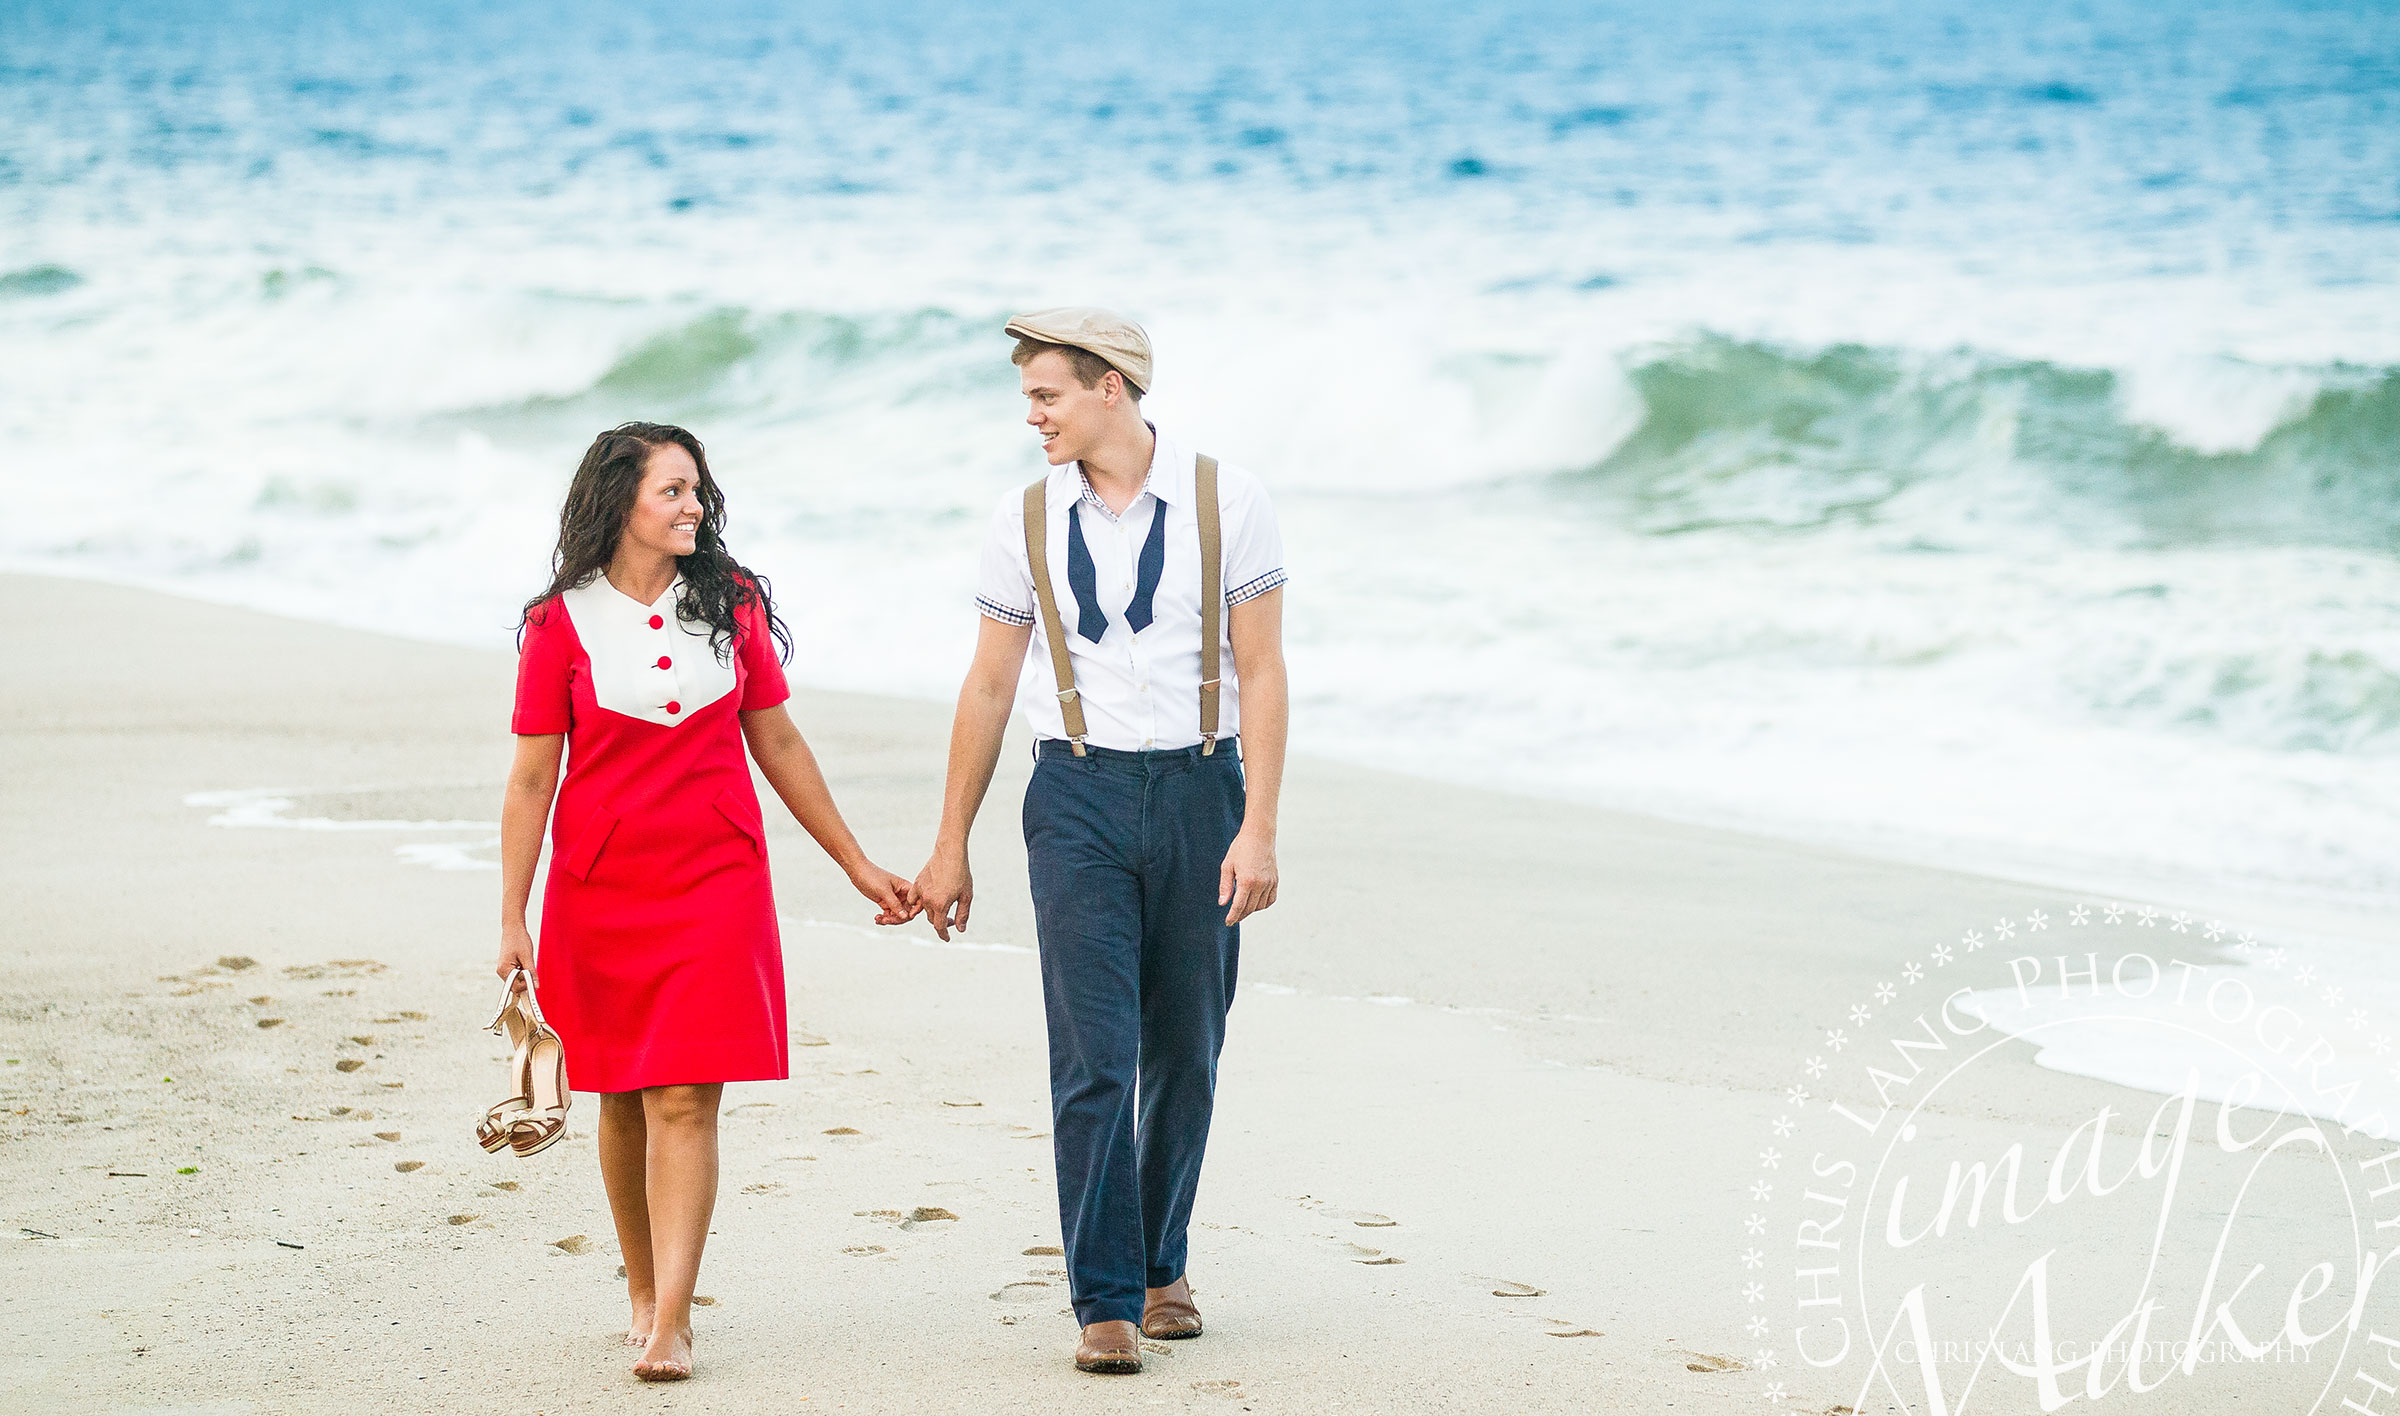 A couple walking on the beach at forst fisher during a vintage style engagment session.  Engaagment picture ideas & inspiration.